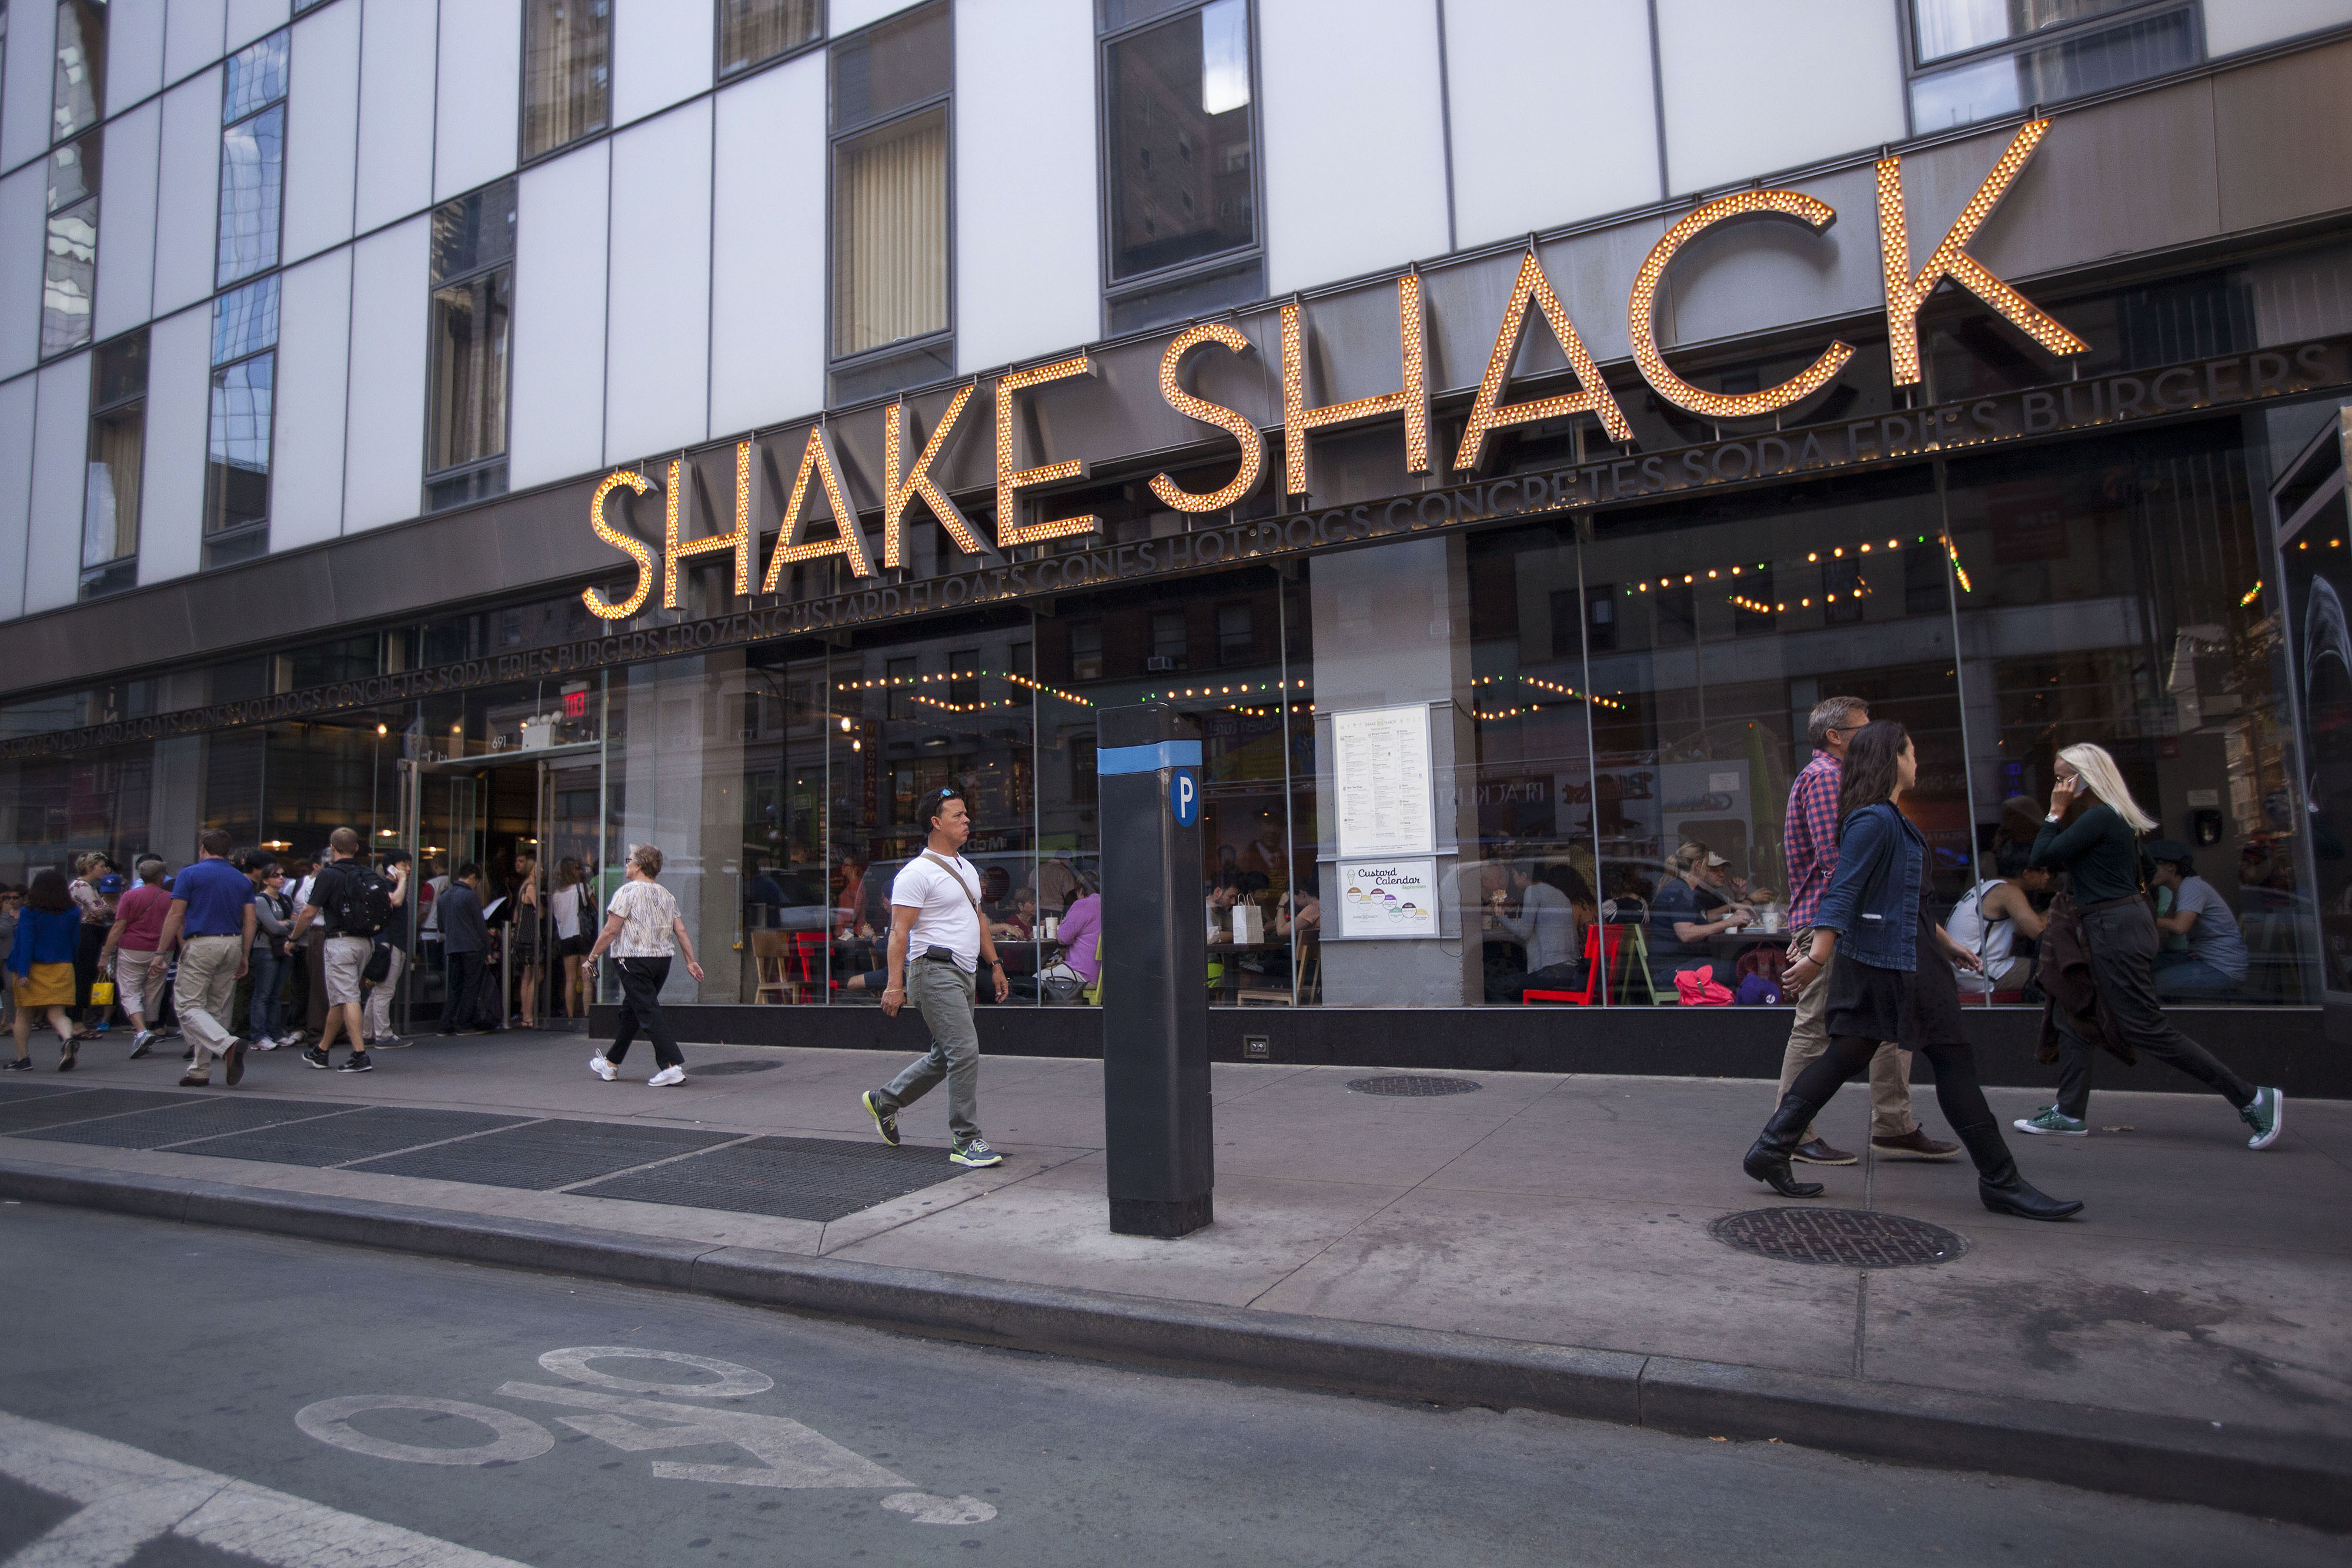 A Shake Shack restaurant in New York City. (Bloomberg—Bloomberg via Getty Images)